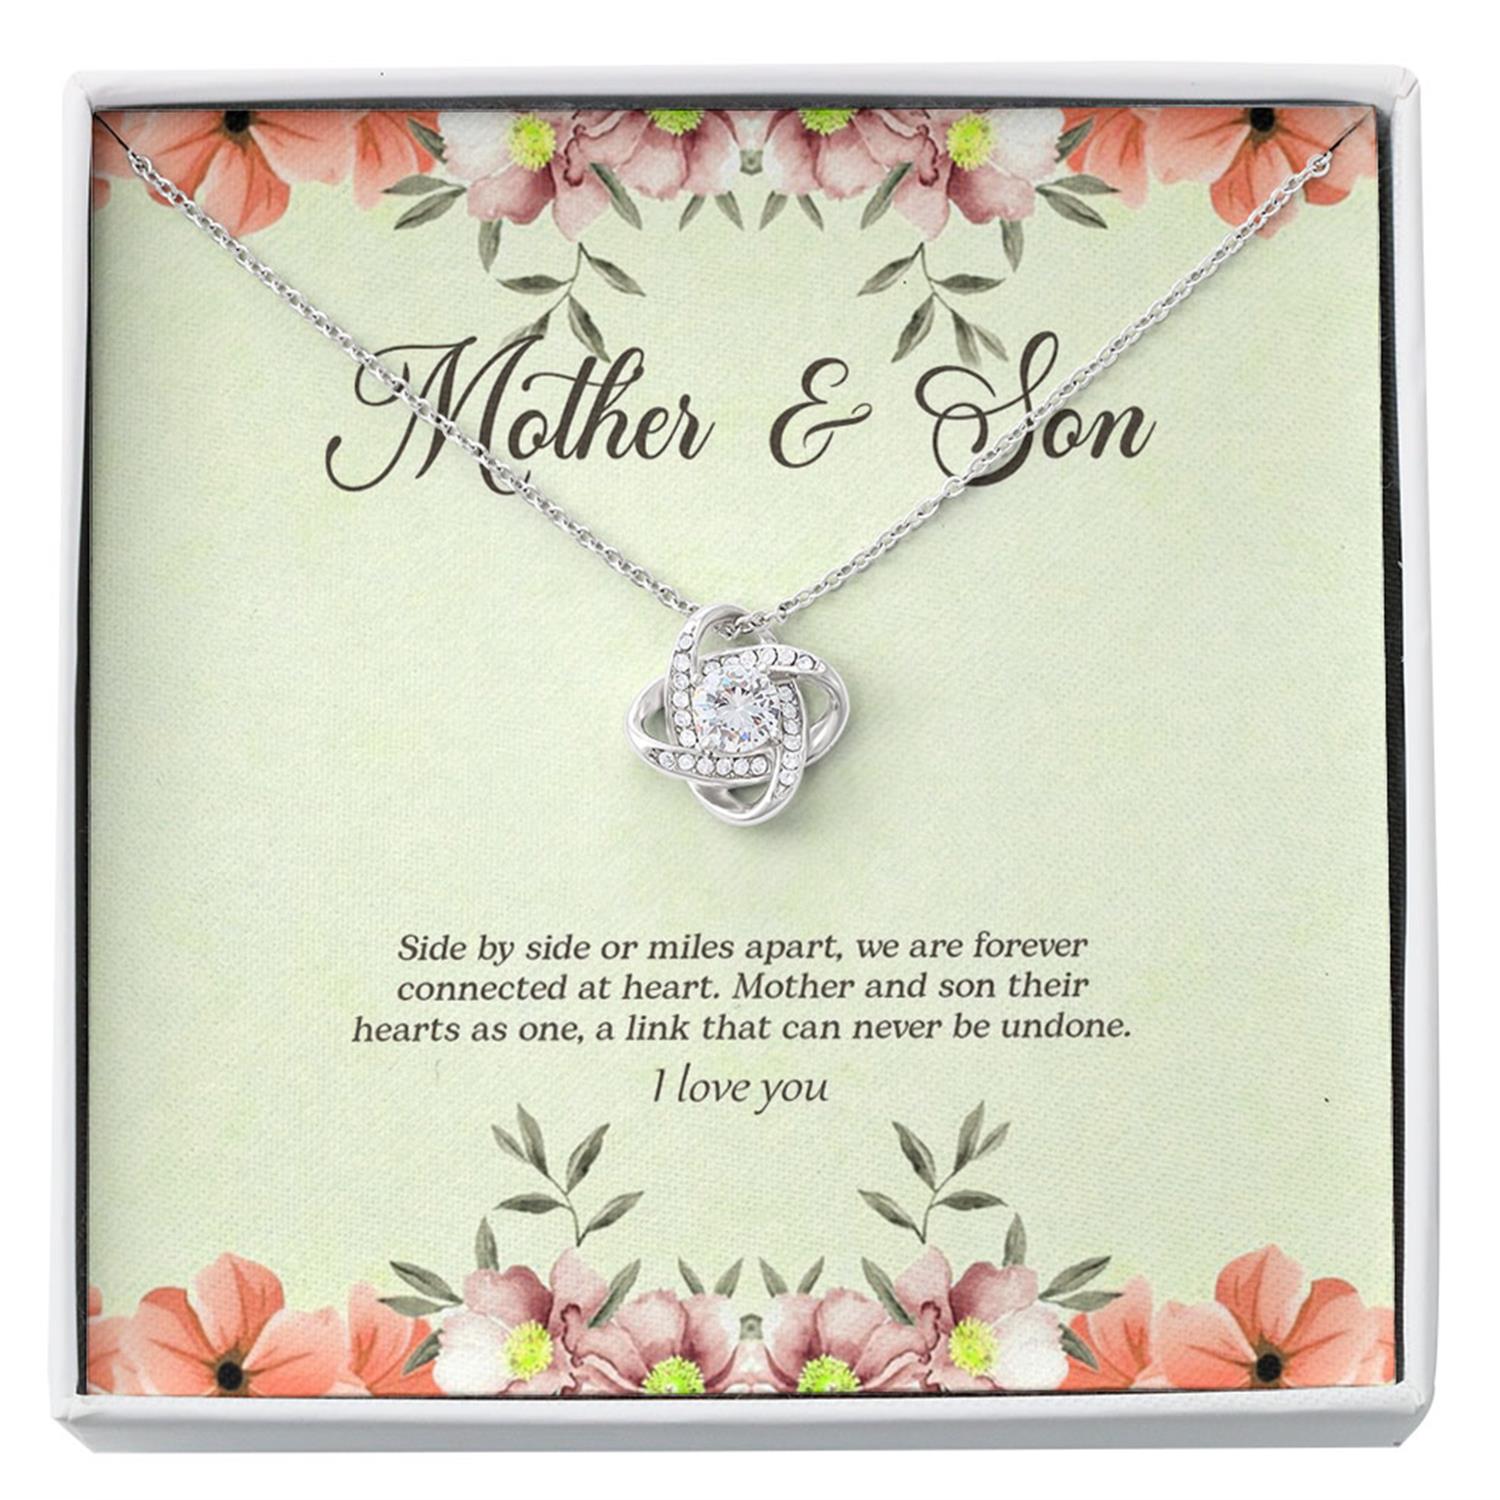 Mom Necklace, Necklace Mother & Son, Mom Gifts From Son, Gift For Mom From Son, Mother Necklaces From Son, Sentimental Gifts For Mom From Custom Necklace